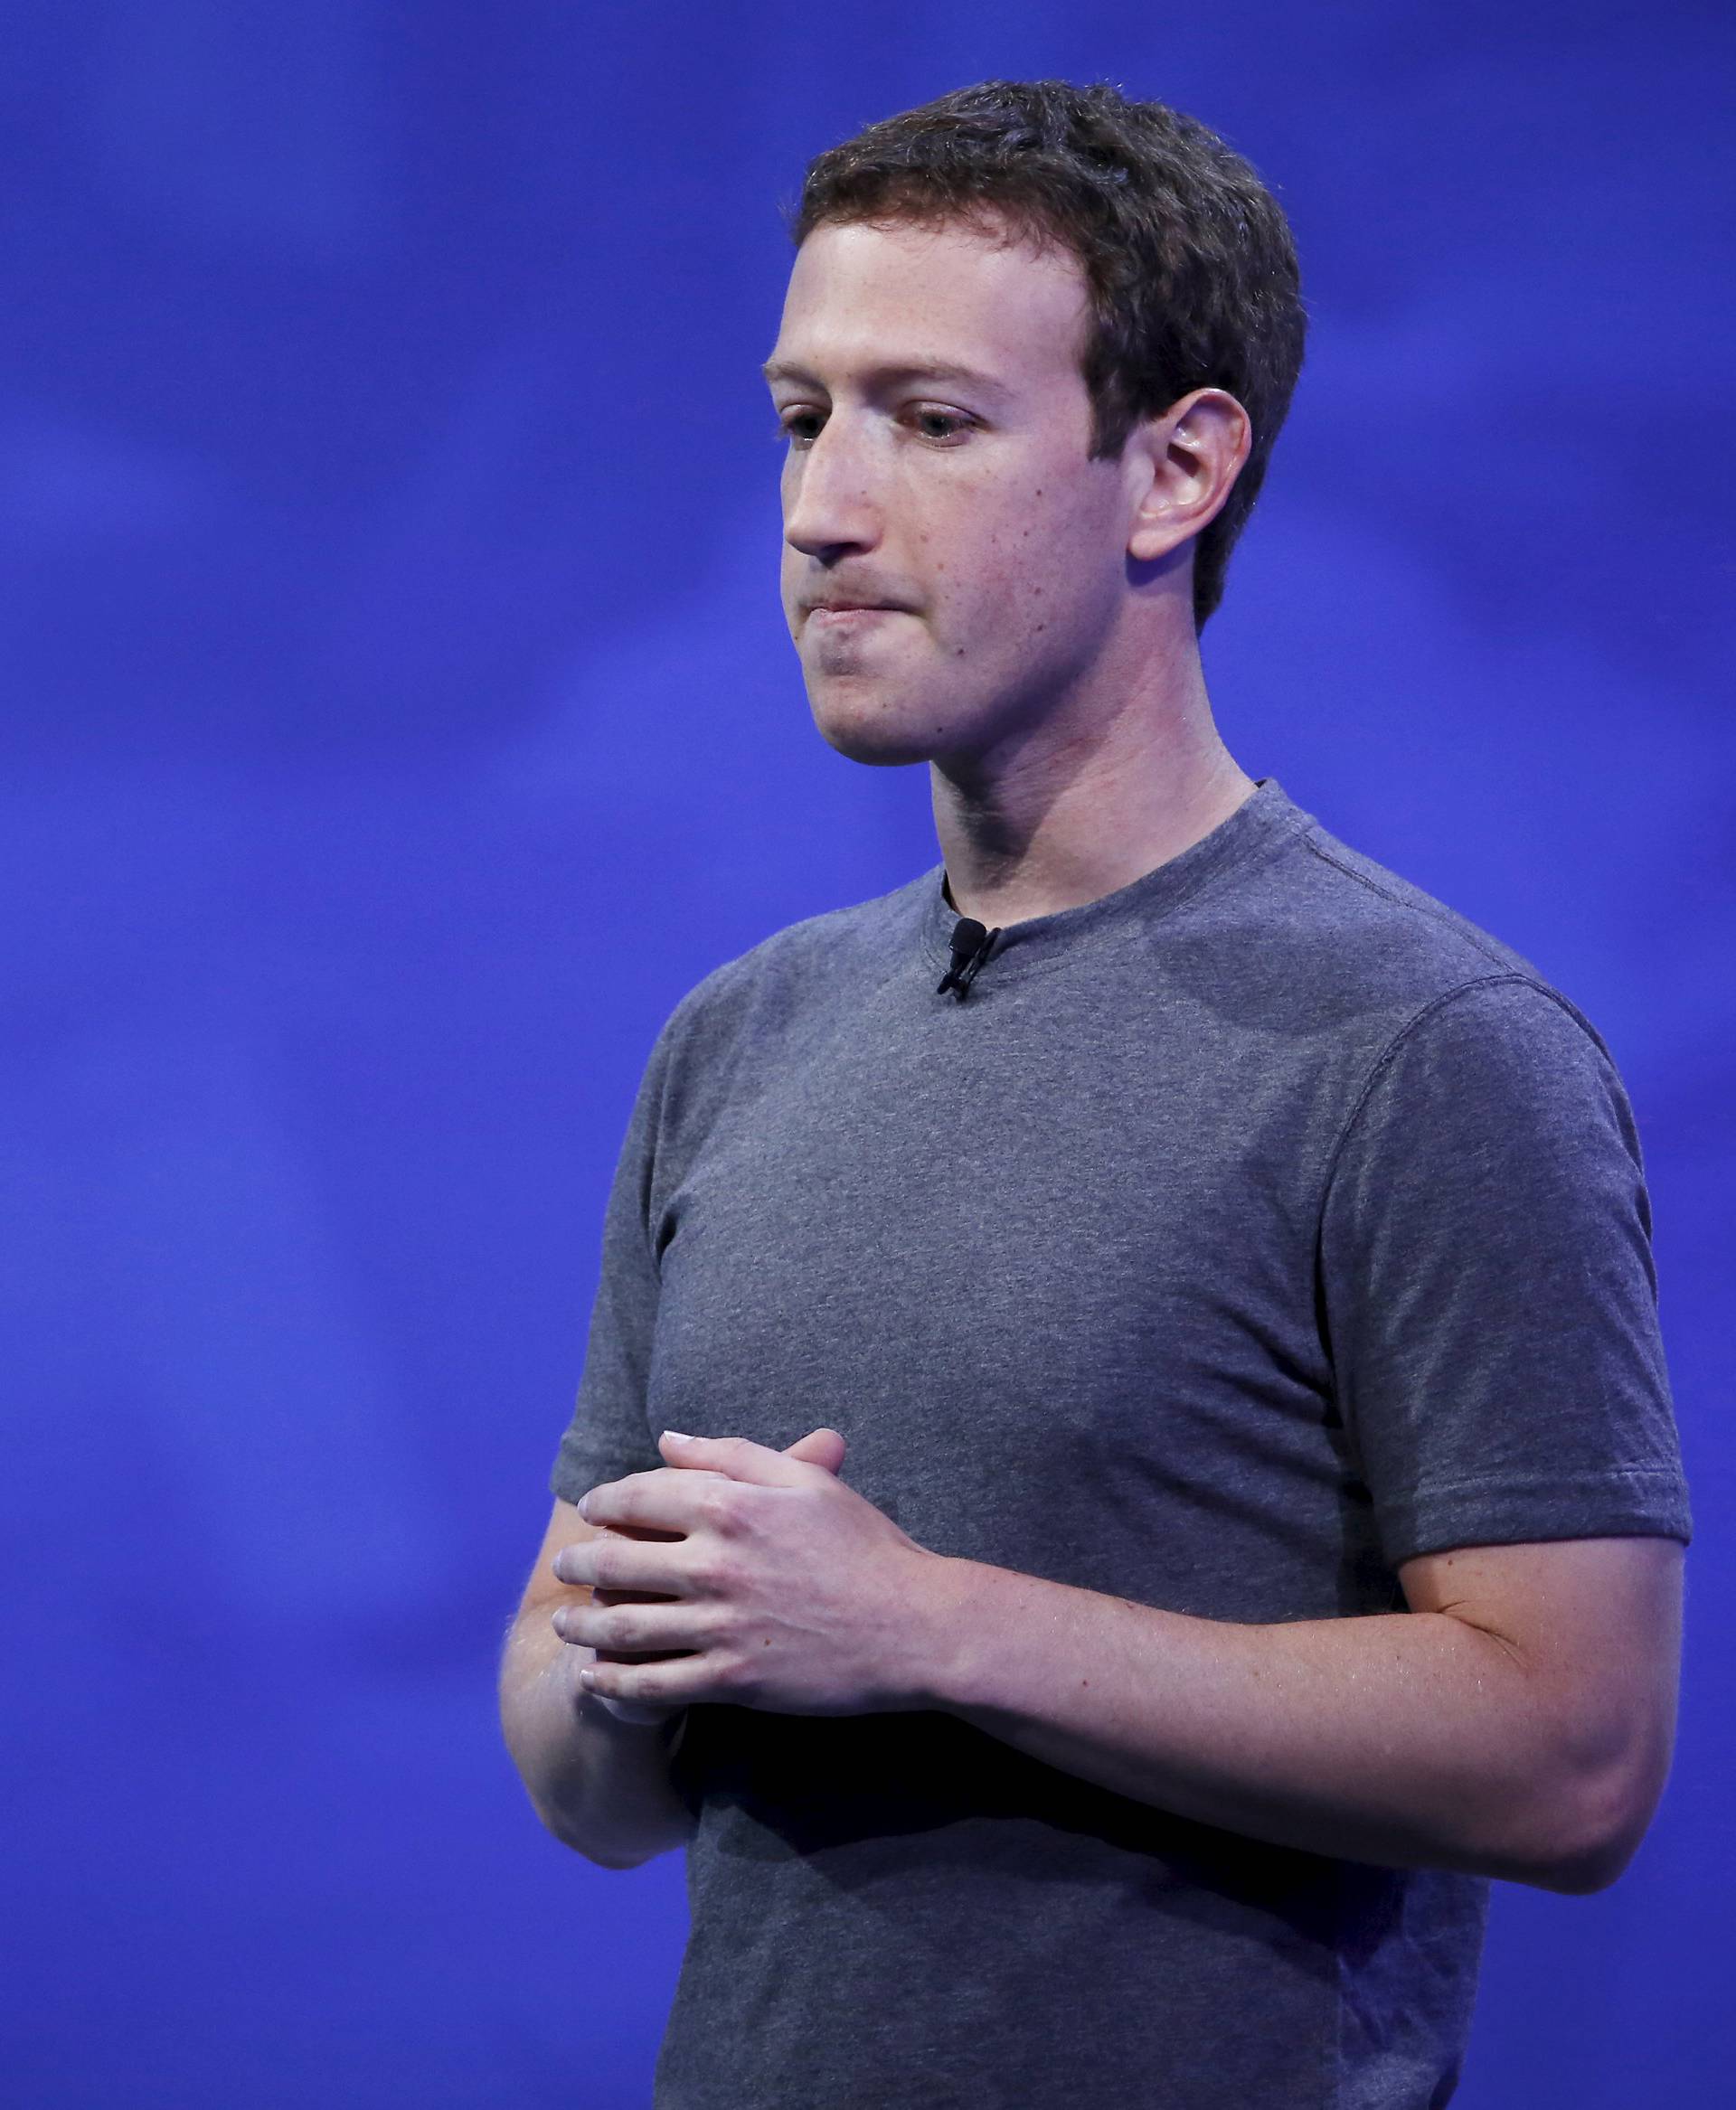 Facebook CEO Mark Zuckerberg speaks on stage during the Facebook F8 conference in San Francisco, California